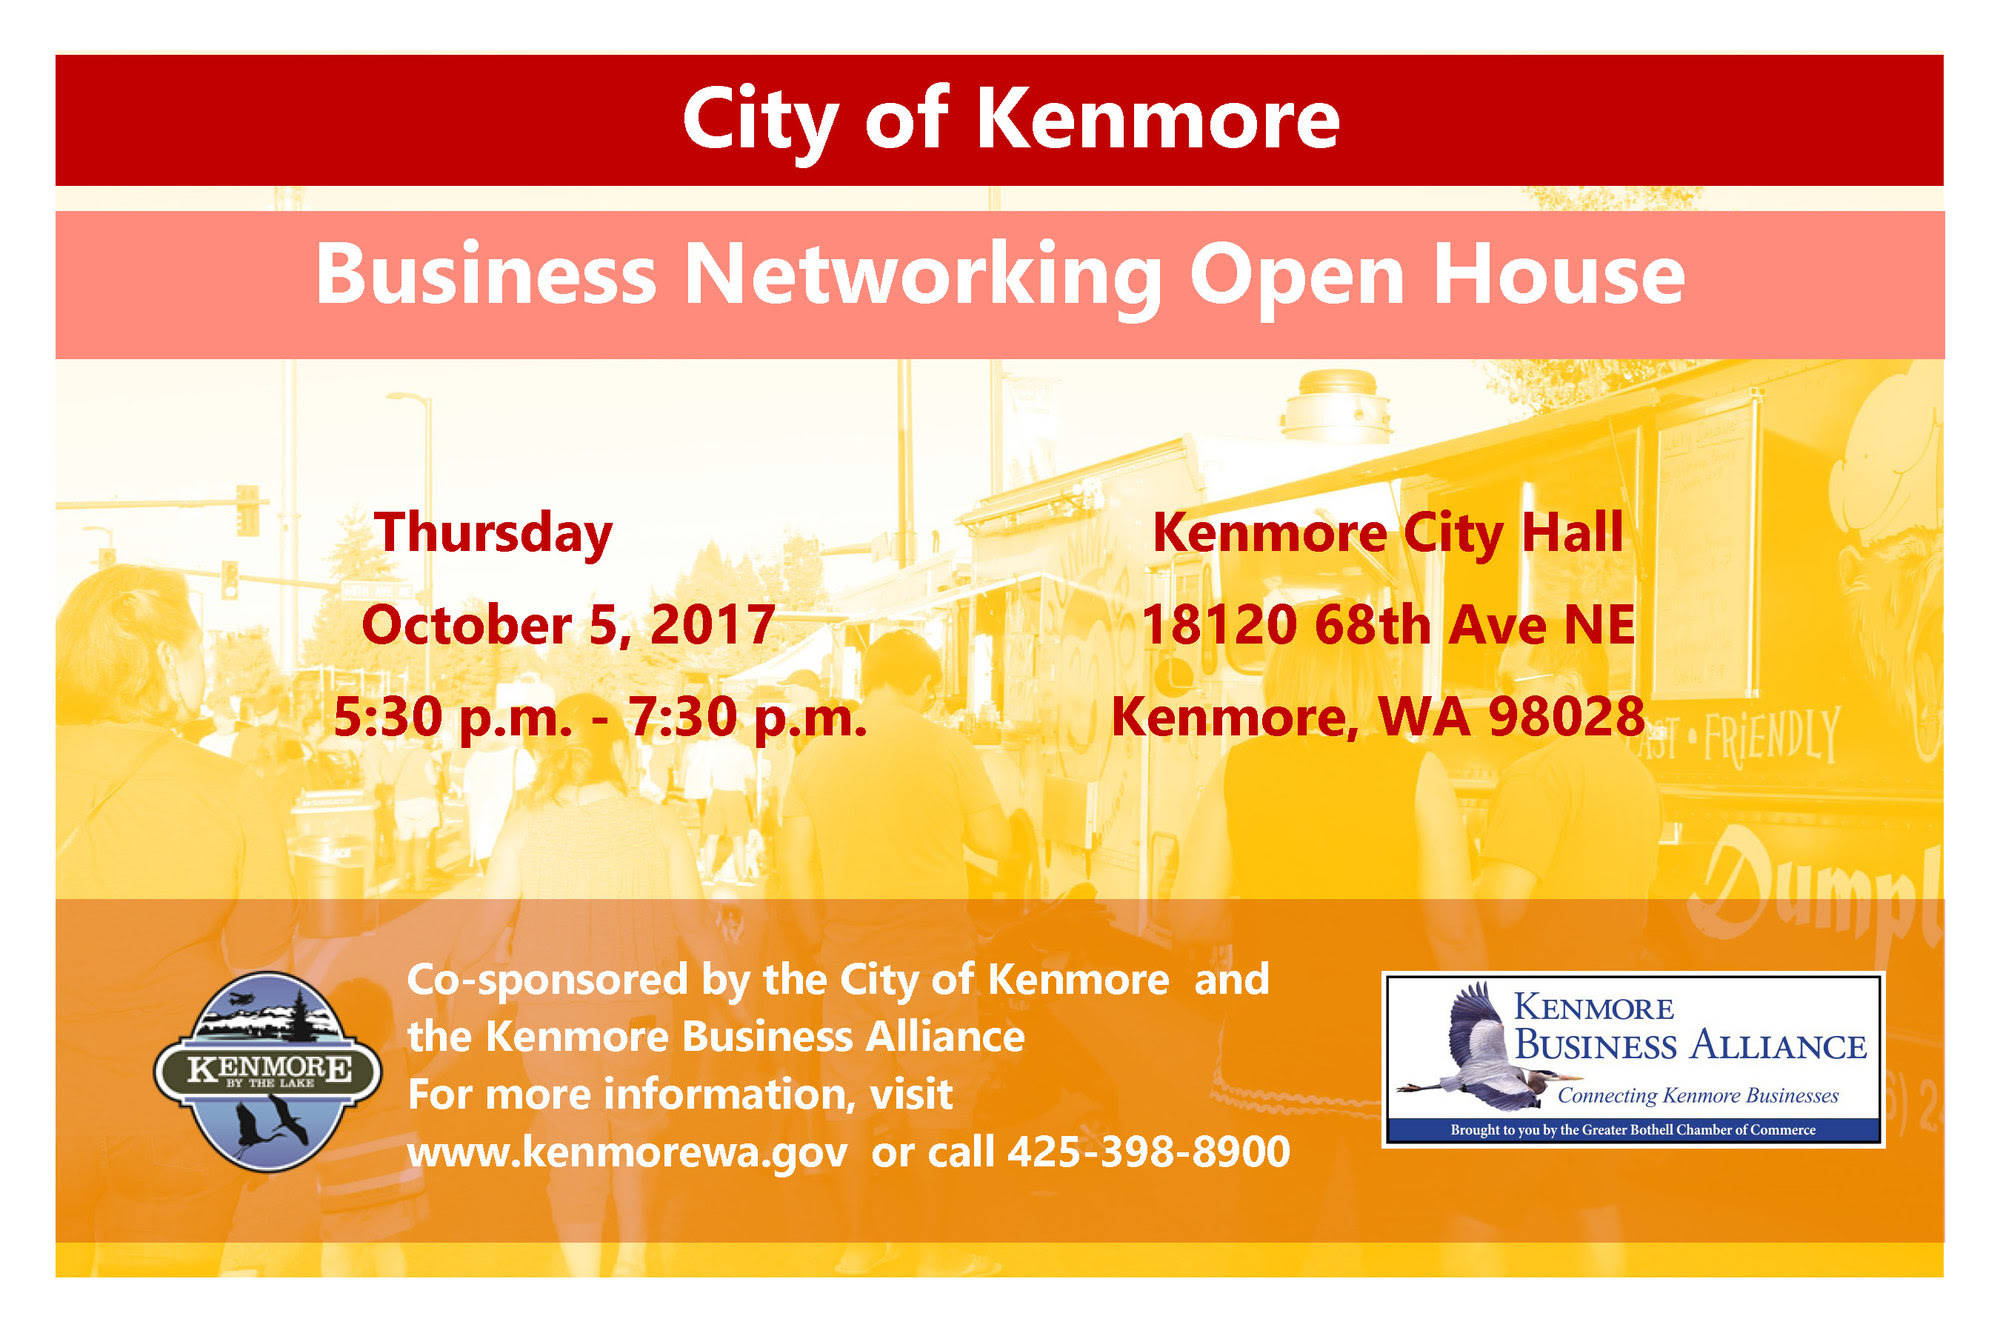 Kenmore Business Networking Open House set for Oct. 5